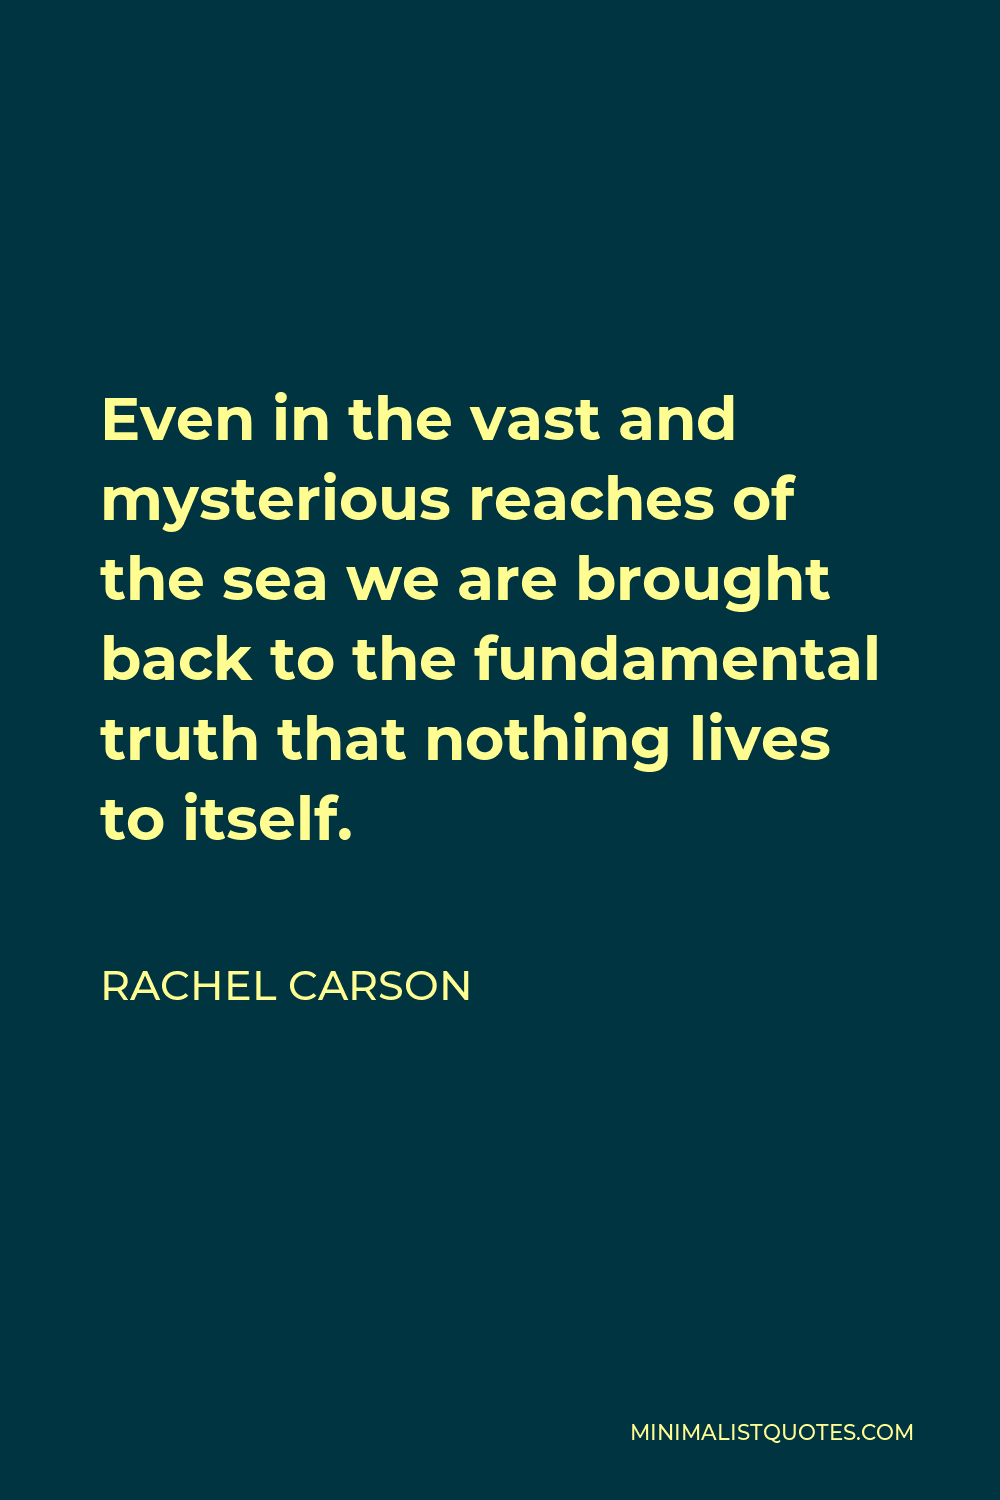 Rachel Carson Quote - Even in the vast and mysterious reaches of the sea we are brought back to the fundamental truth that nothing lives to itself.